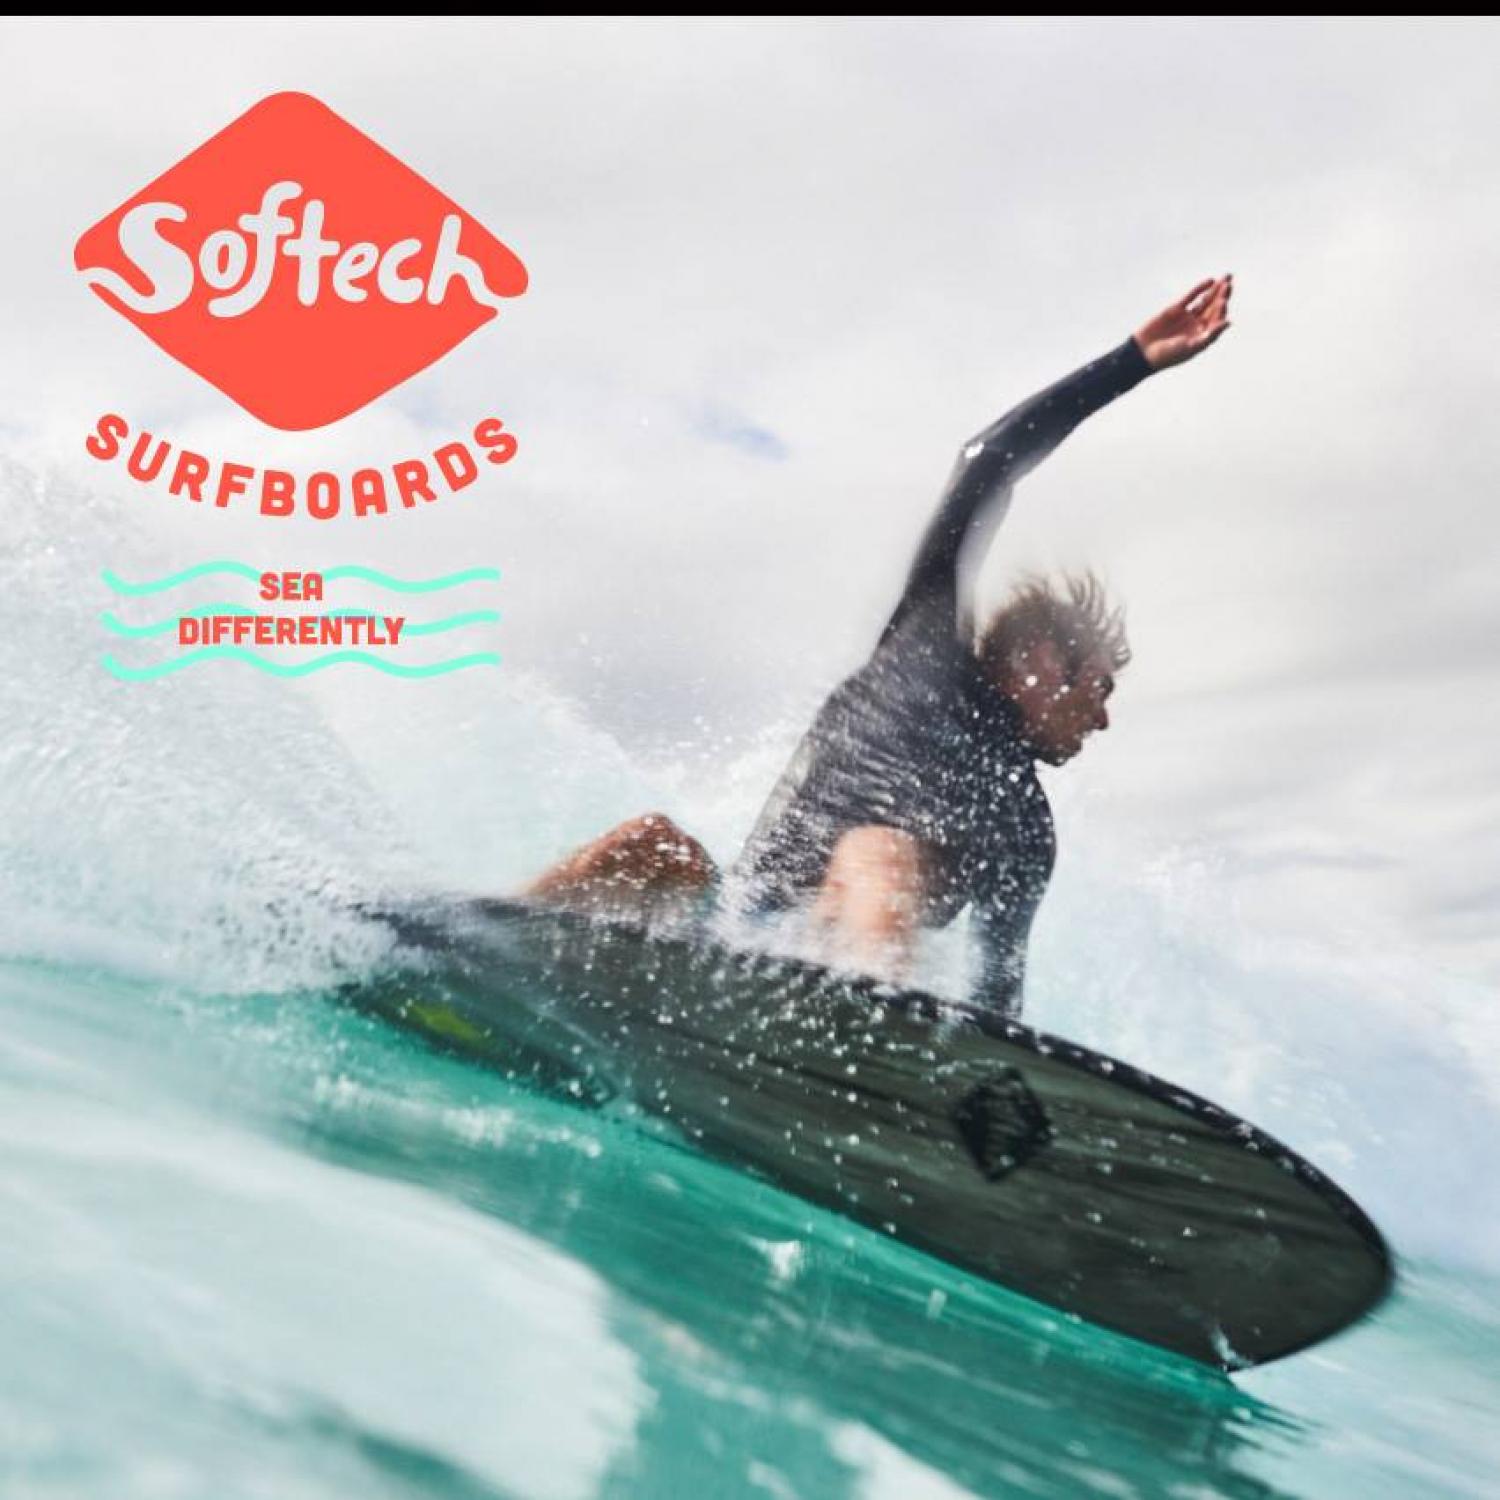 Arrival planned news of Softech Surfboards 1